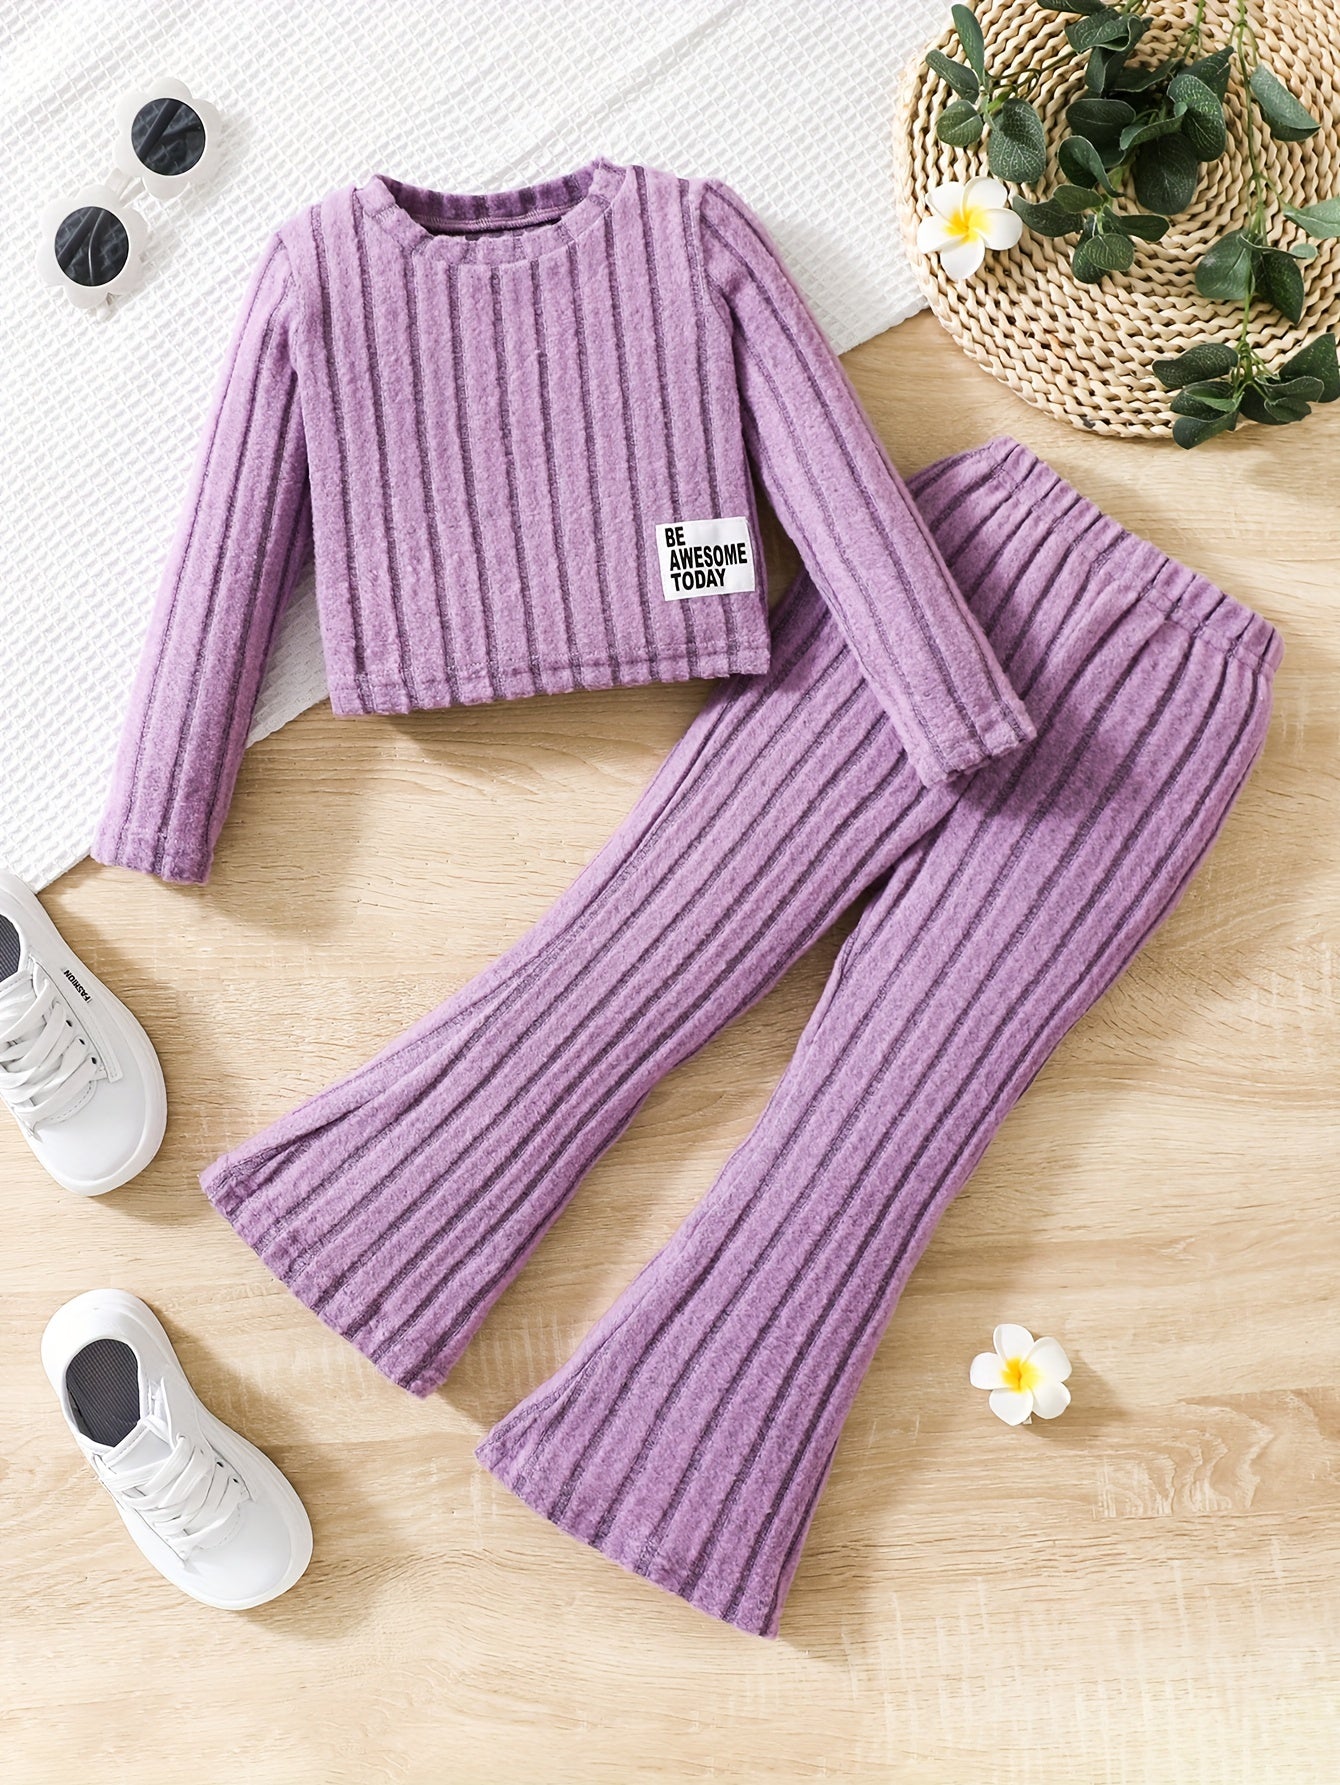 Girl's Solid Color Ribbed Outfit 2pcs, Long Sleeve Top & Flared Pants Set, BE AWESOME TODAY Pattern Kid's Clothes For Spring Fall